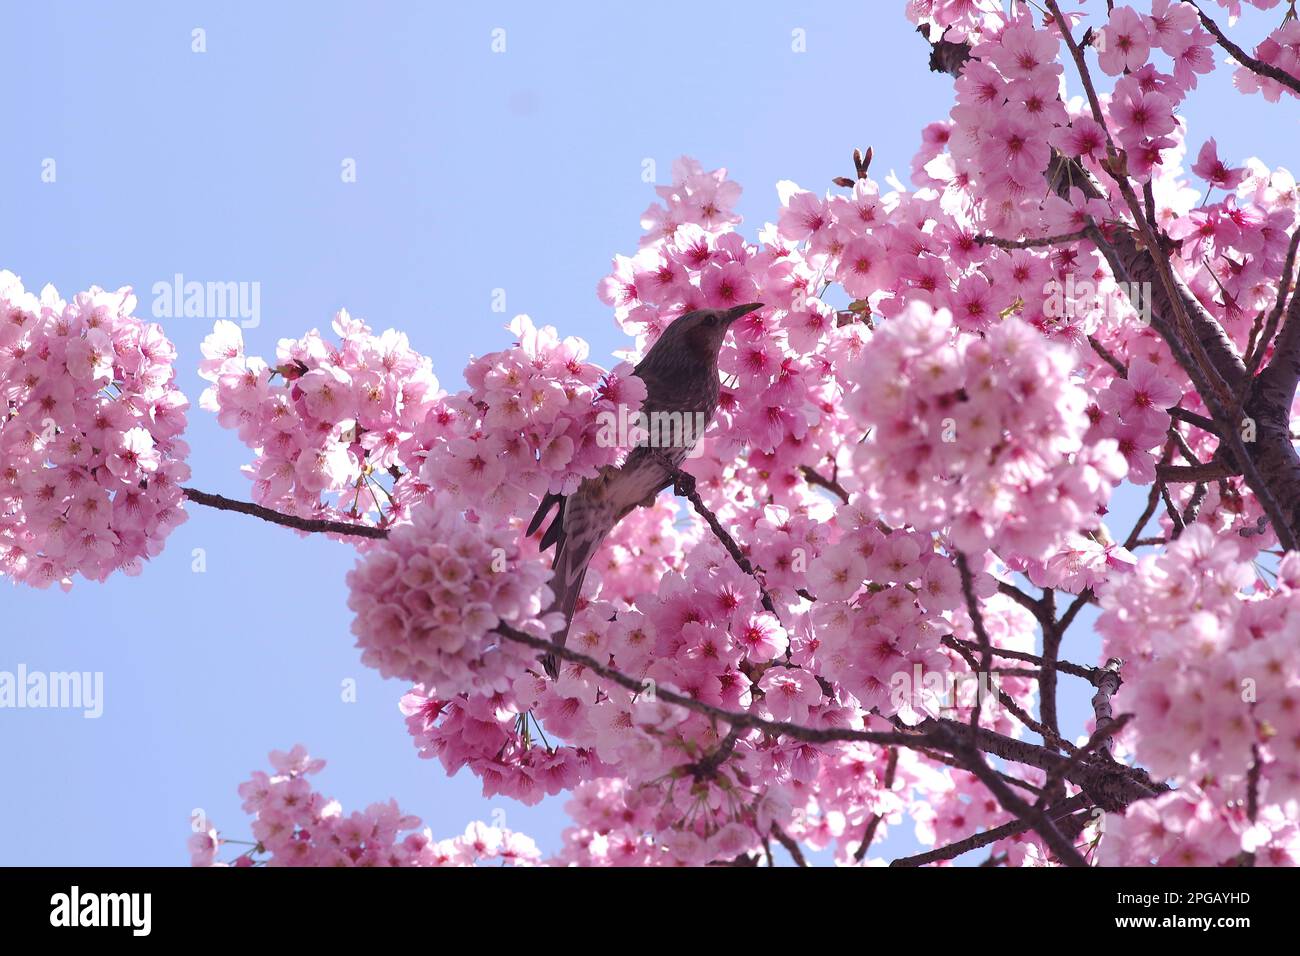 Bird and Cherry Blossoms Stock Photo